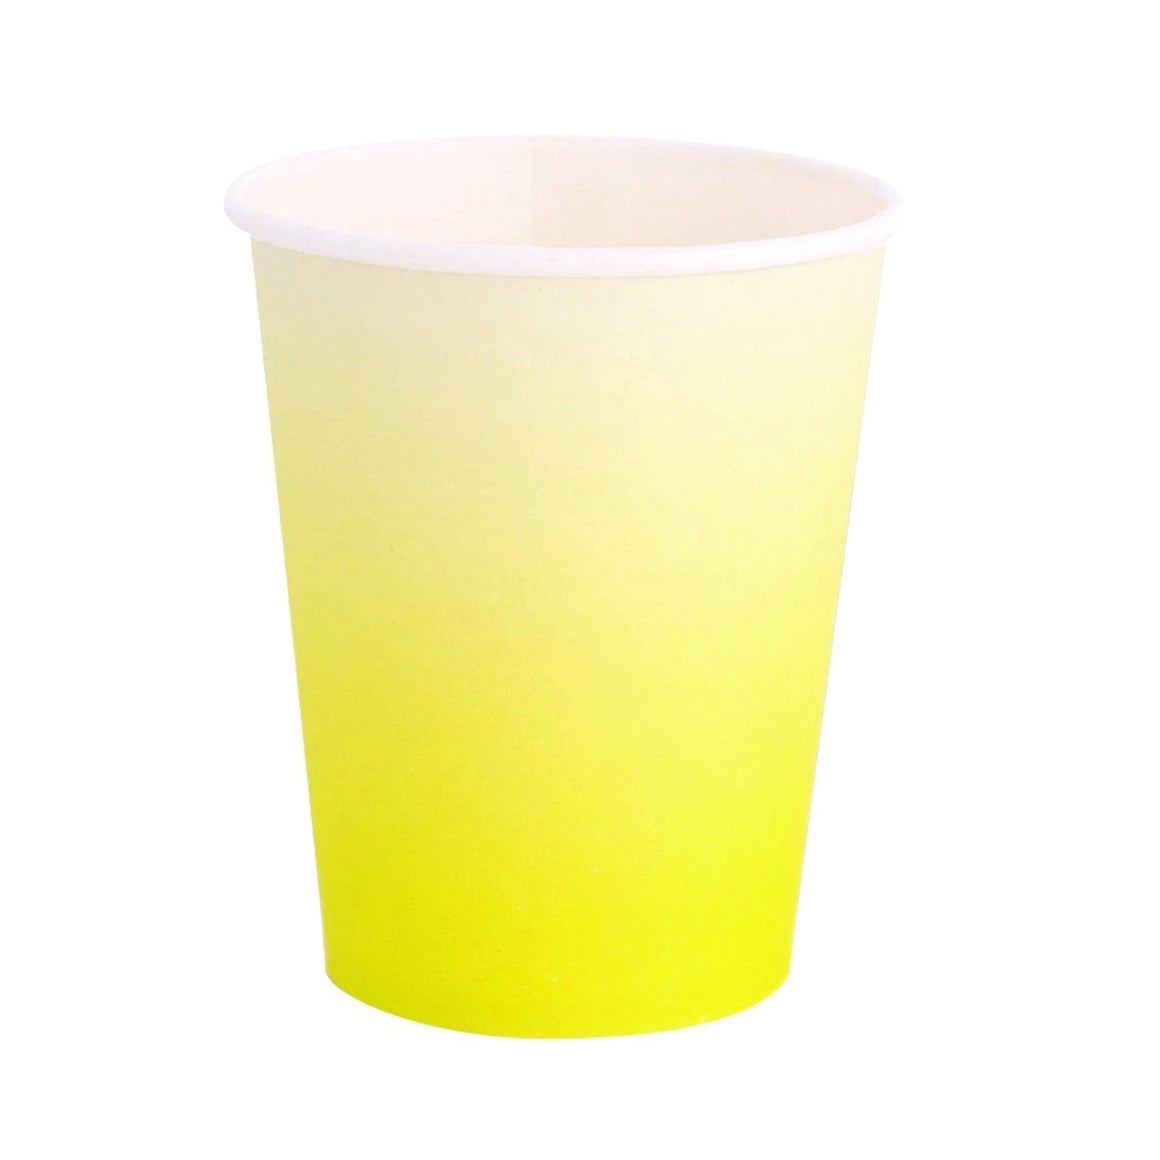 CUPS - YELLOW CHARTREUSE OMBRÉ OH HAPPY DAY